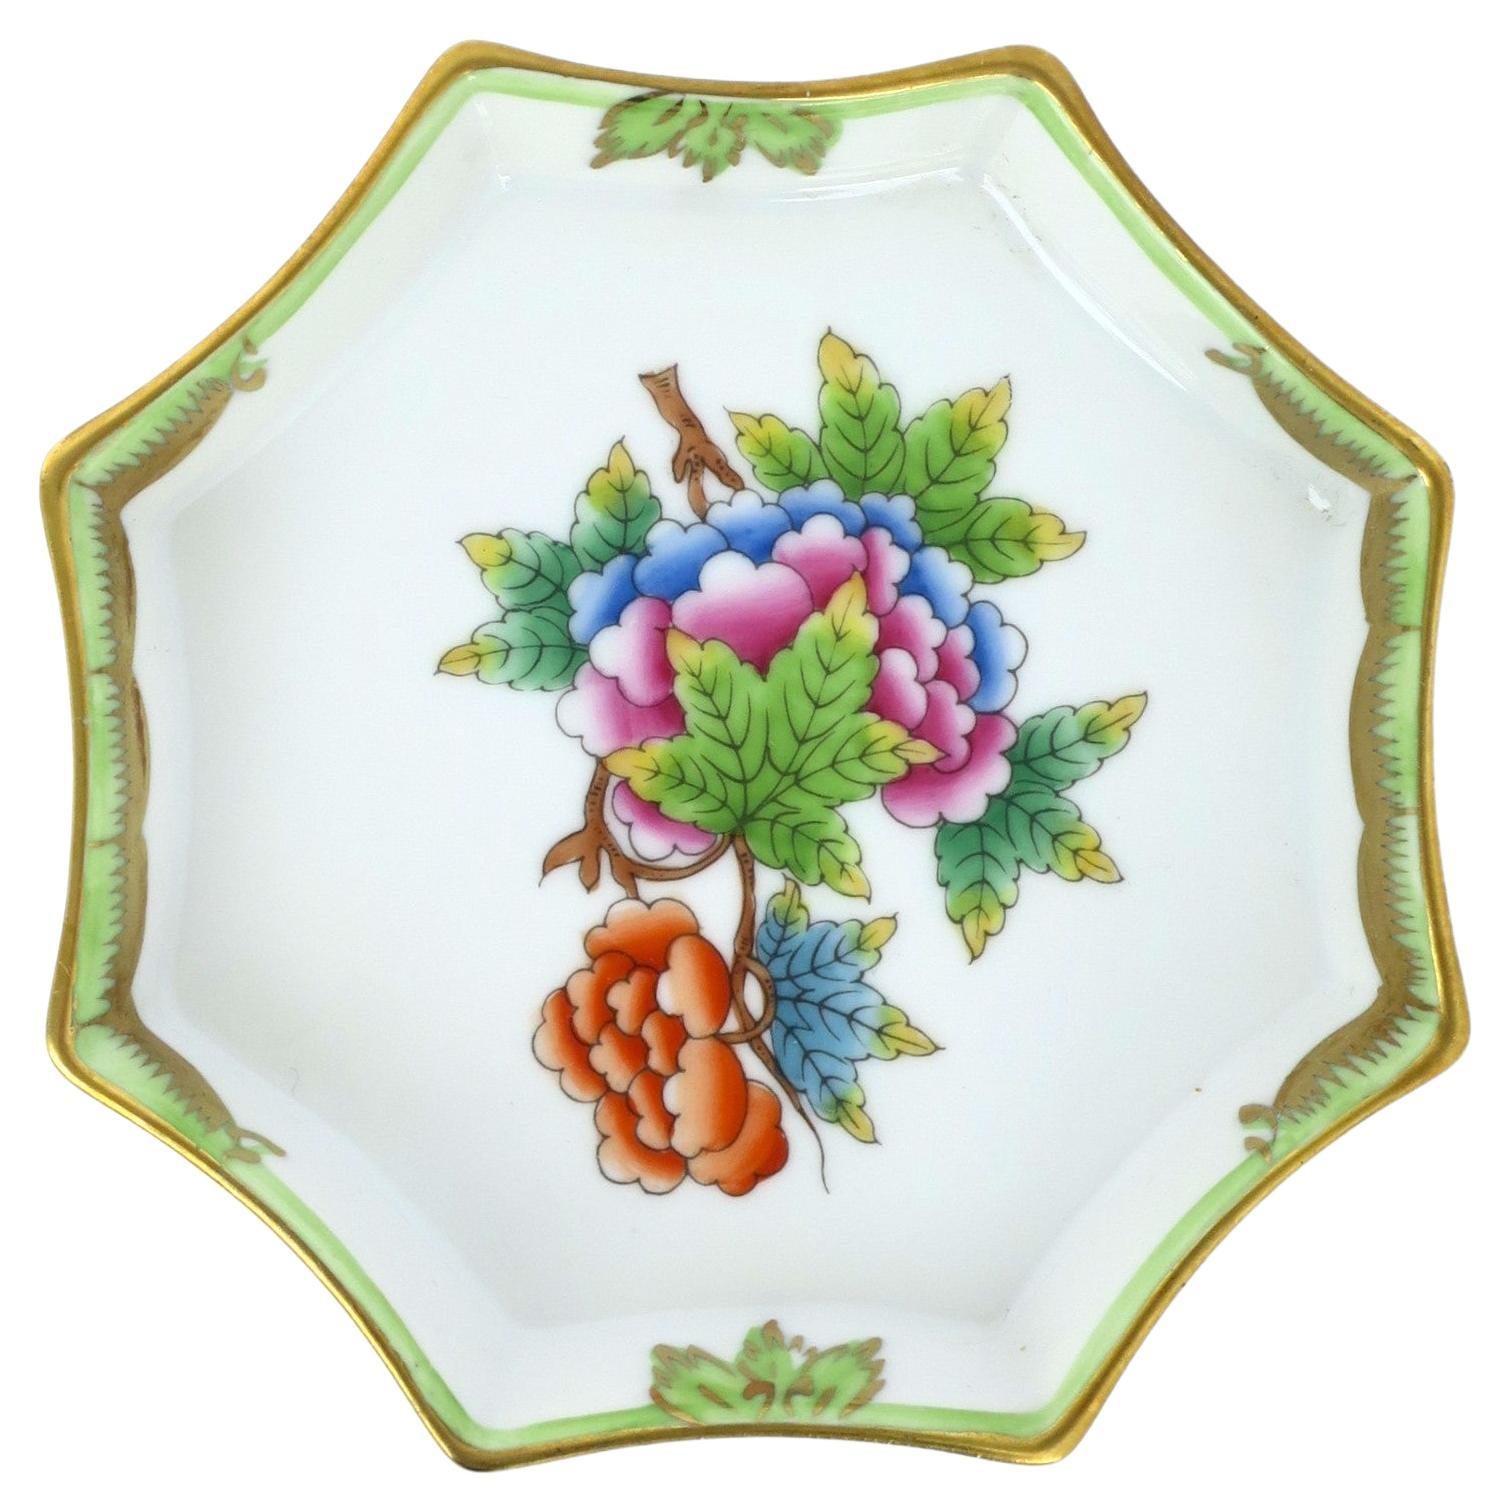 Herend Porcelain Jewelry Dish 